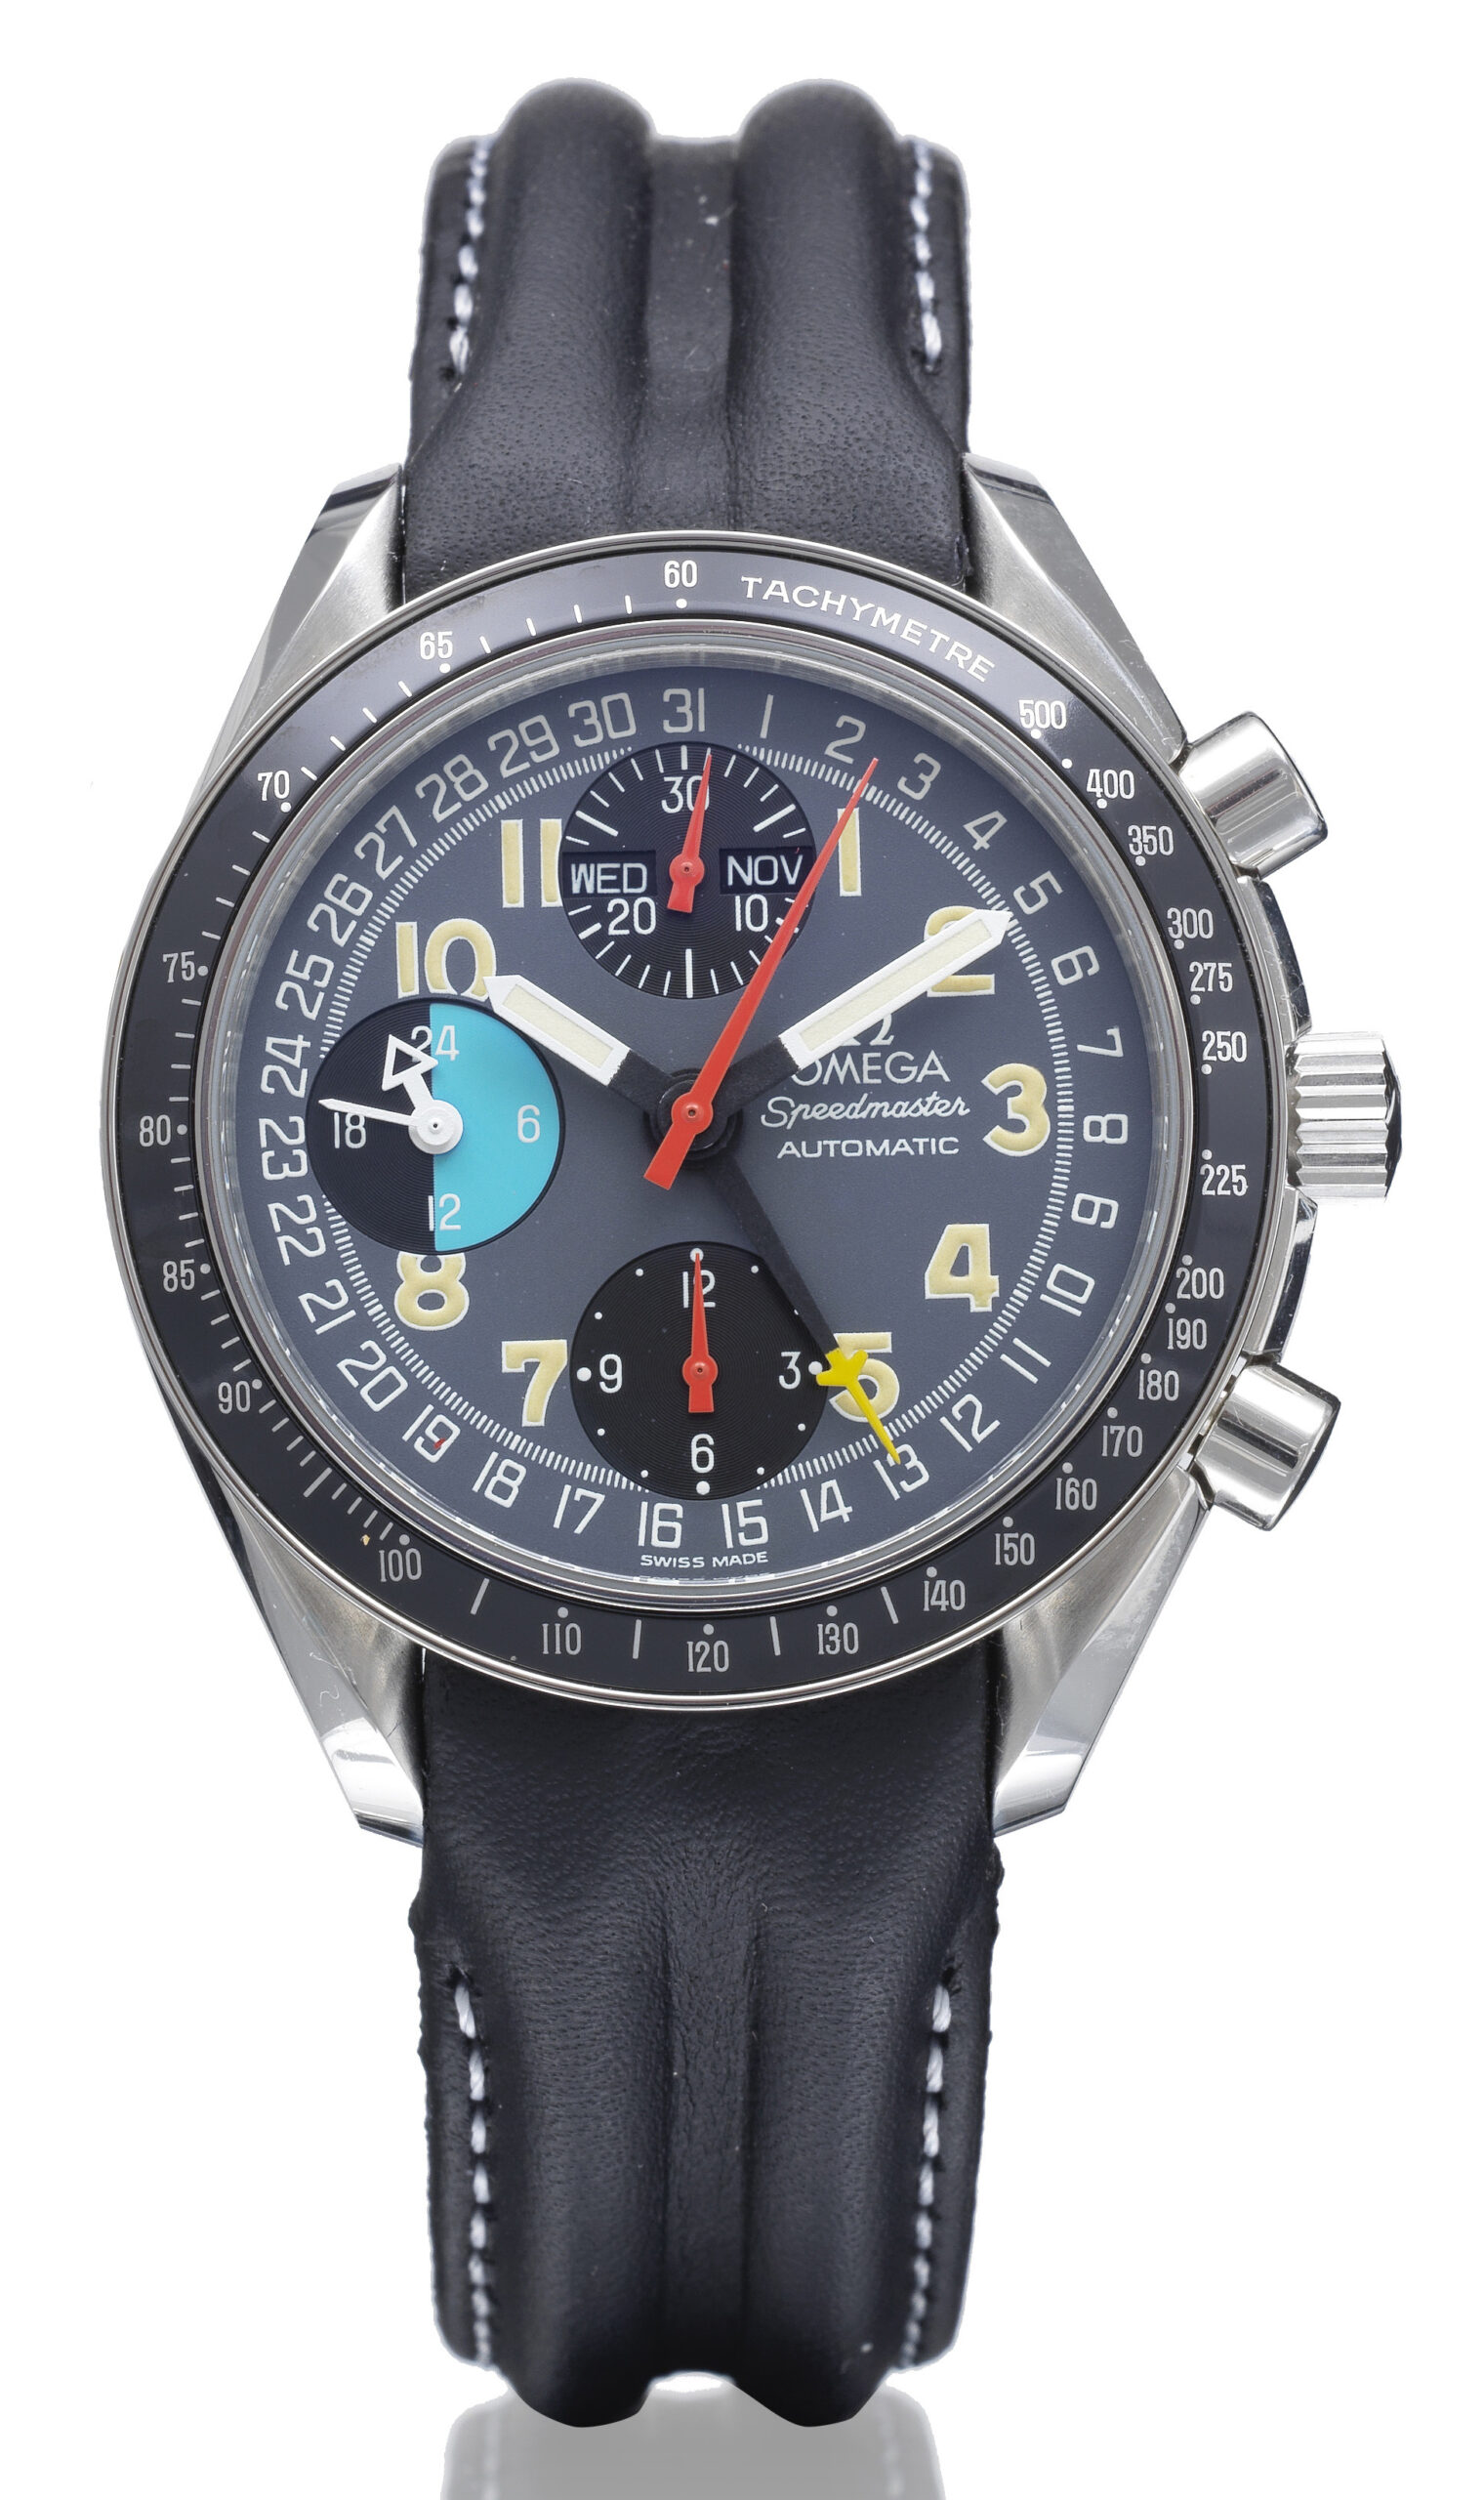 An omega speedmaster automatic mk40 stainless steel automatic triple calendar chronograph wristwatch estimate 5000 7000 scaled